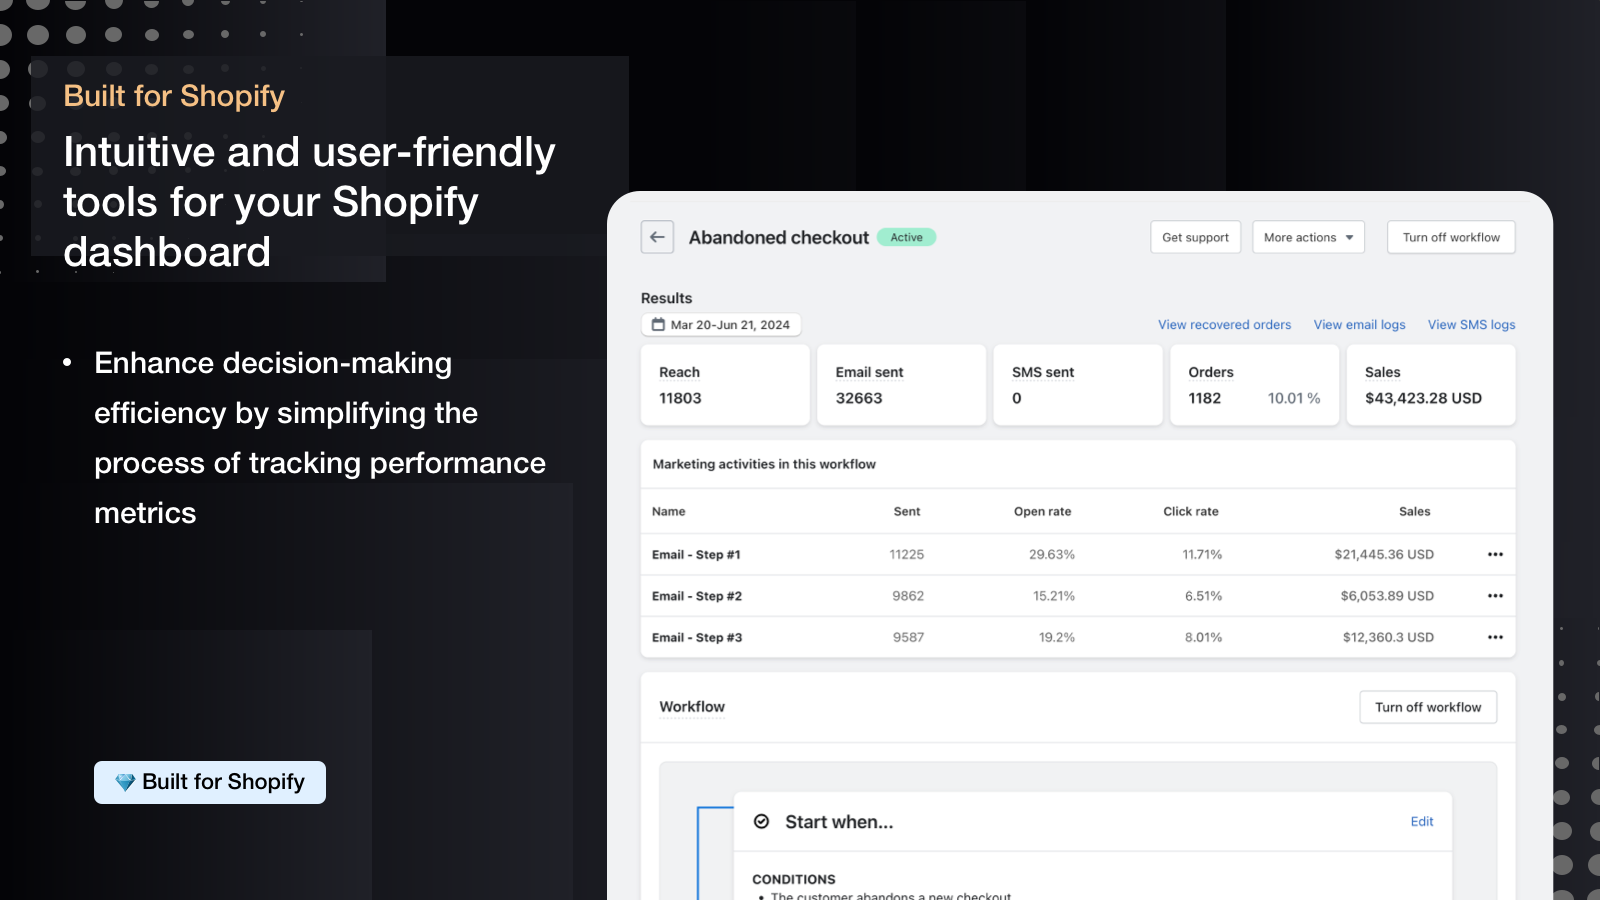 Intuitive and user-friendly tools for your Shopify dashboard